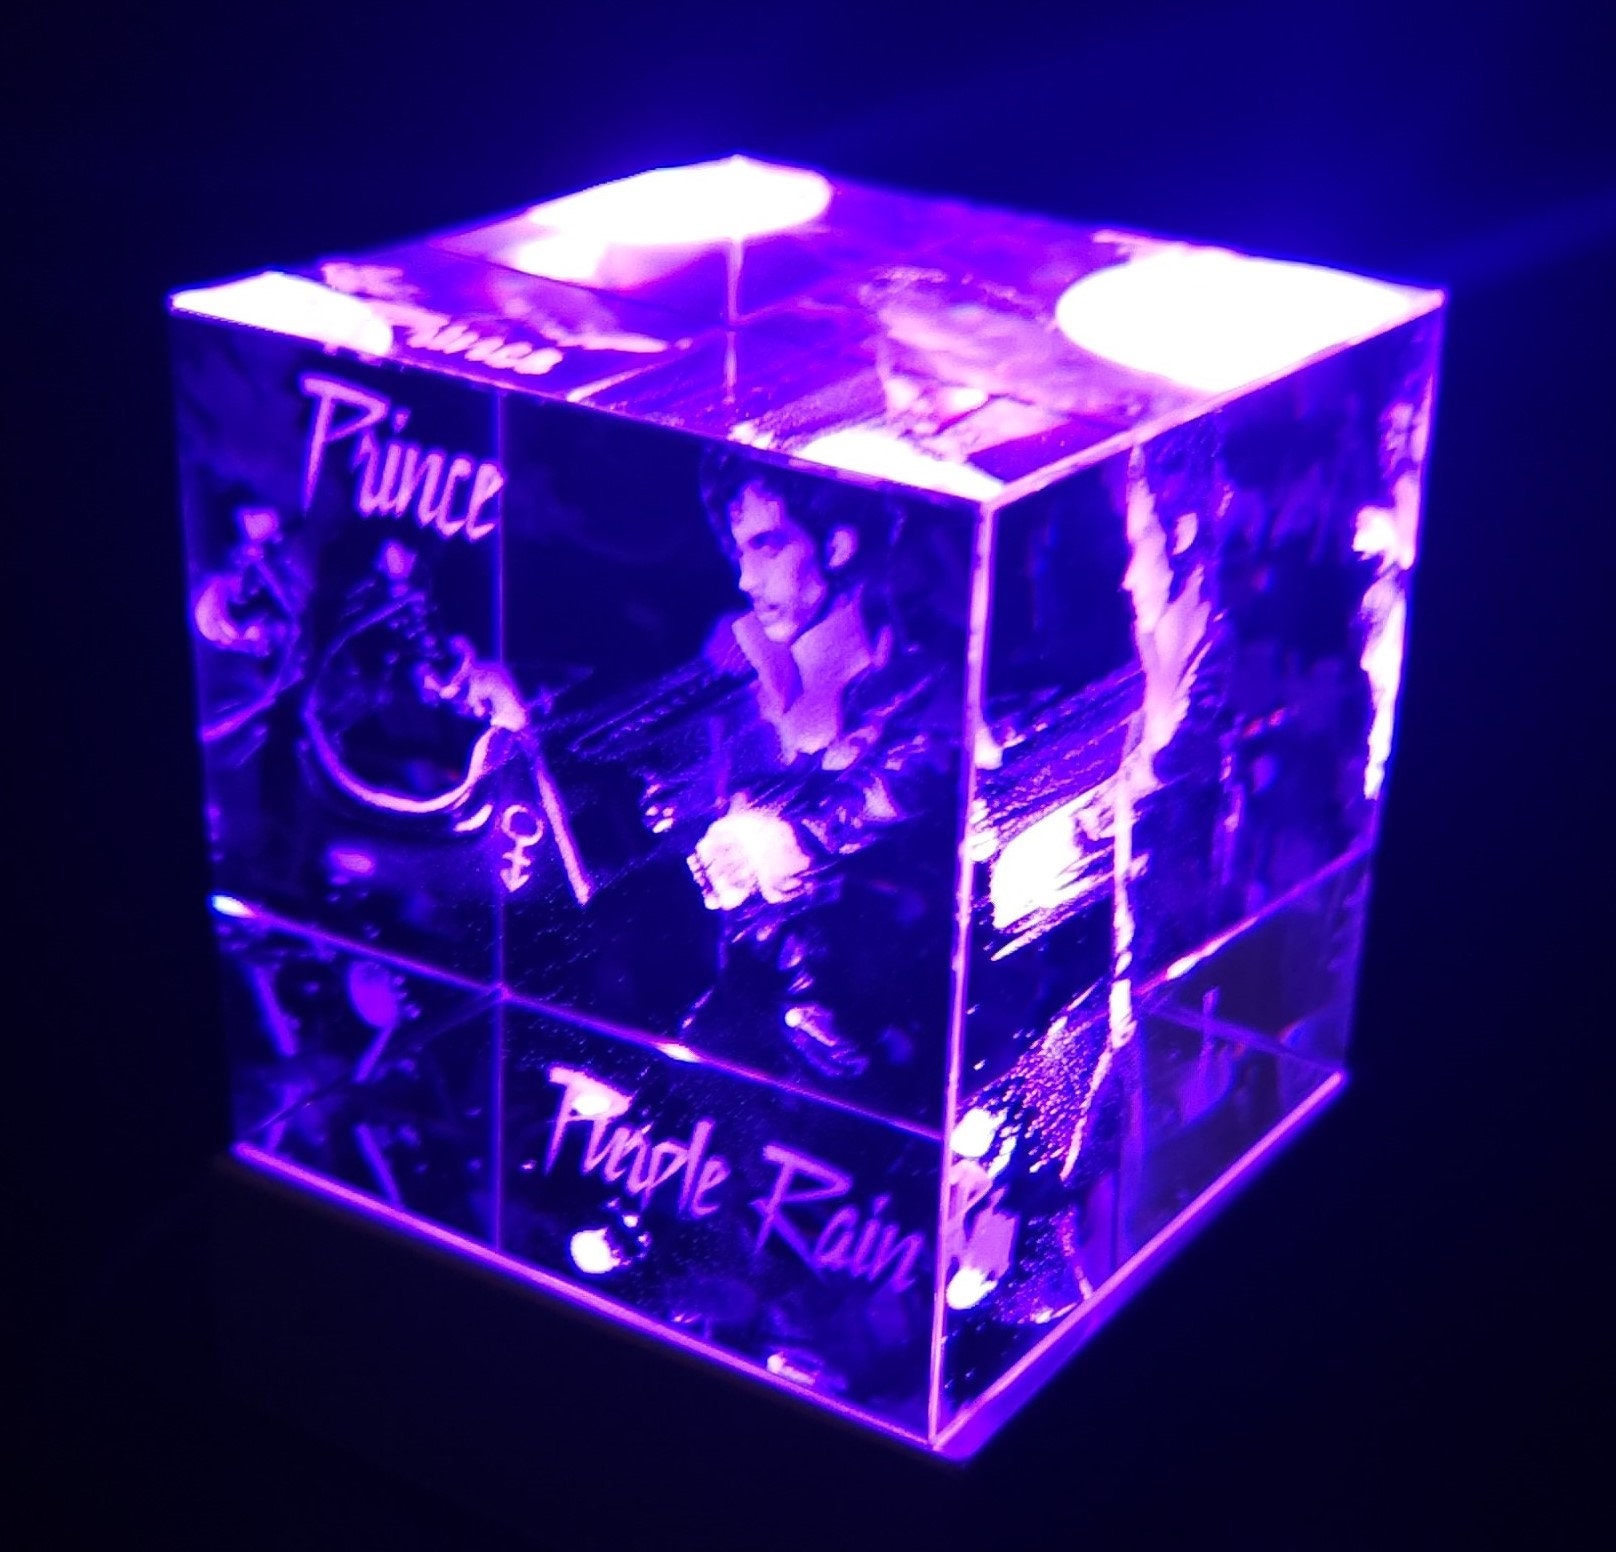 3D stitch&angel Crystal With Free 7-color Changing Square LED Light Base  Free USPS PRIORITY Shipping 